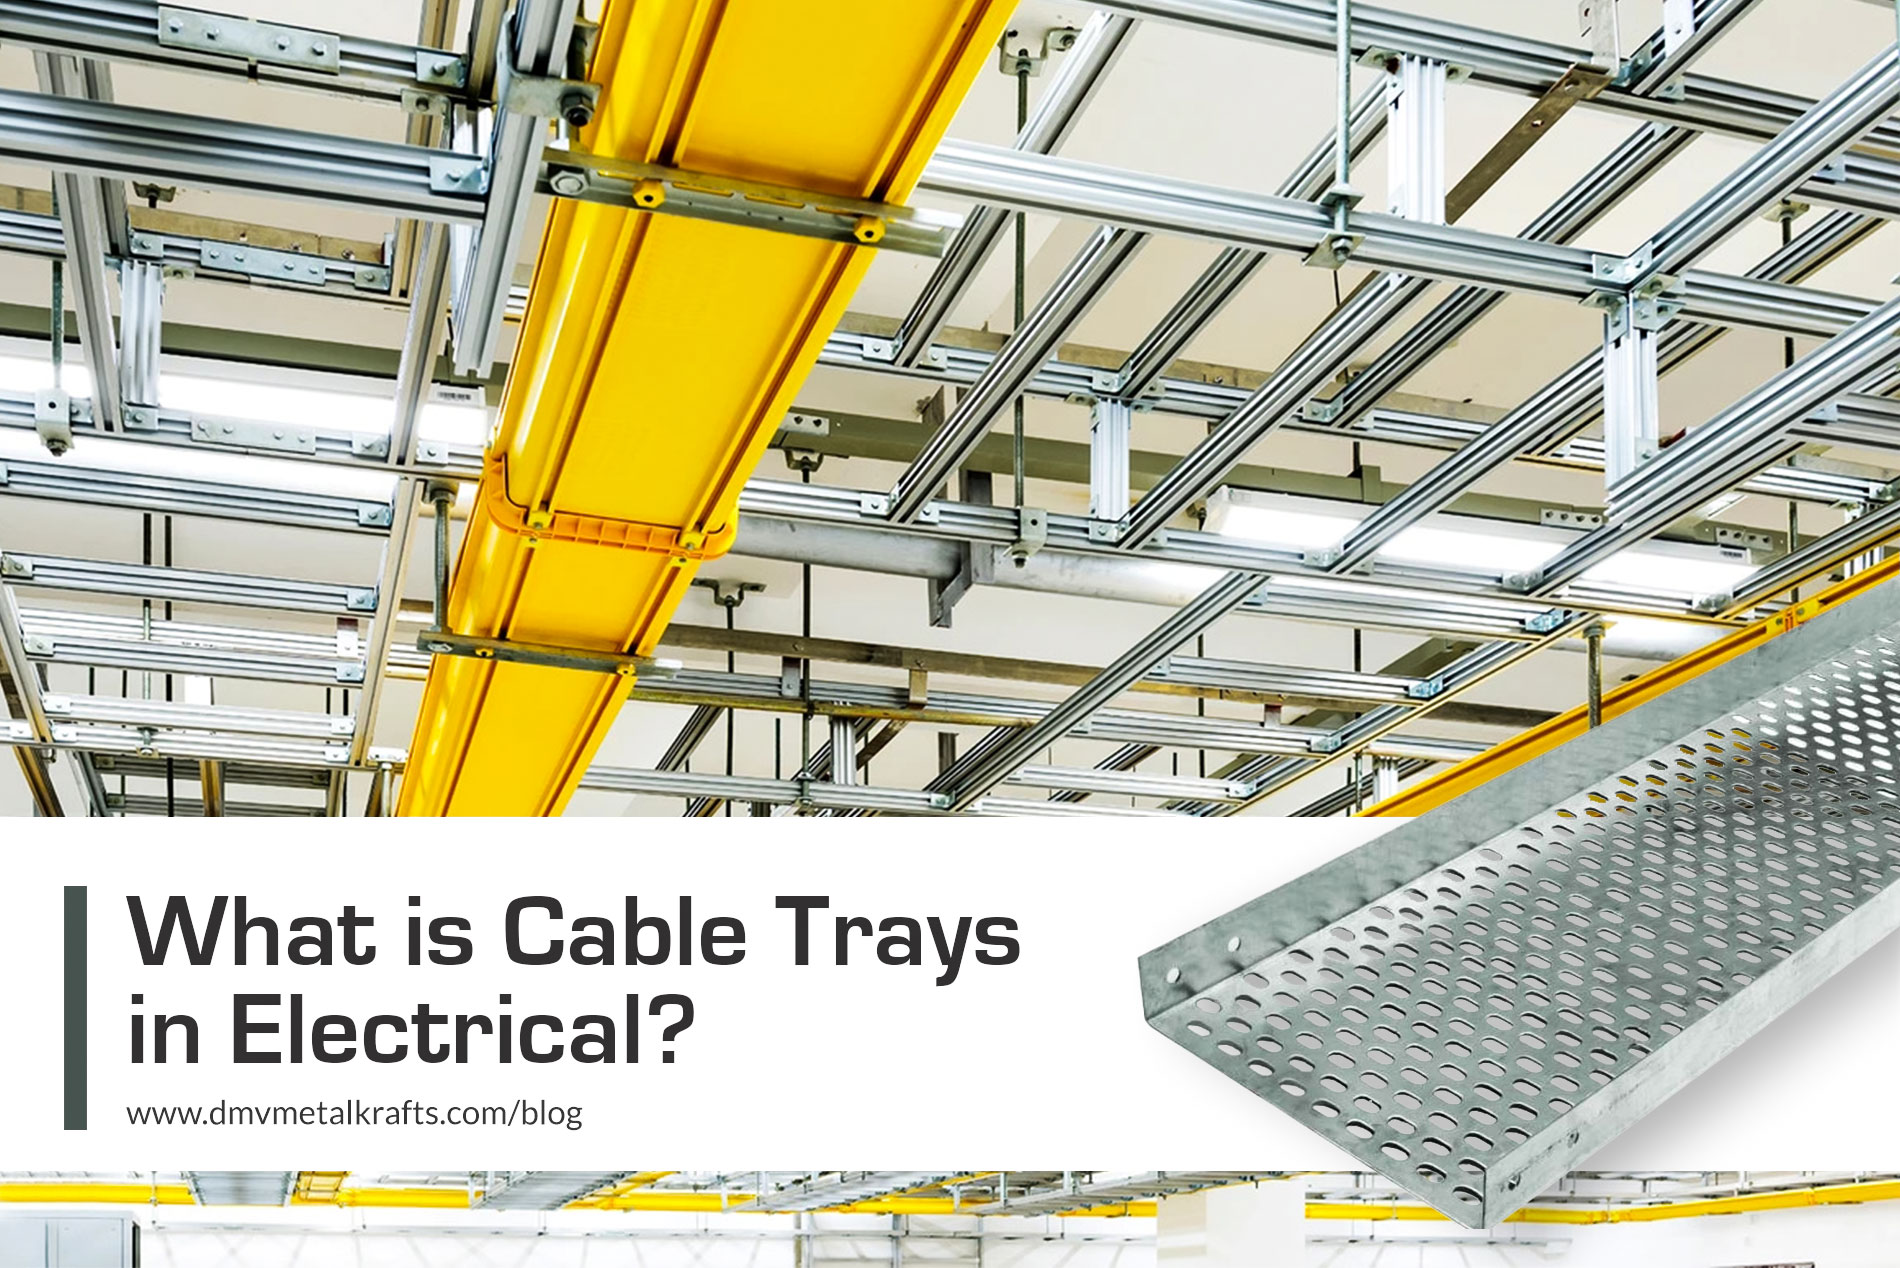 https://www.dmvmetalkrafts.com/blog/wp-content/uploads/2021/09/what-is-cable-trays-in-electrical.jpg